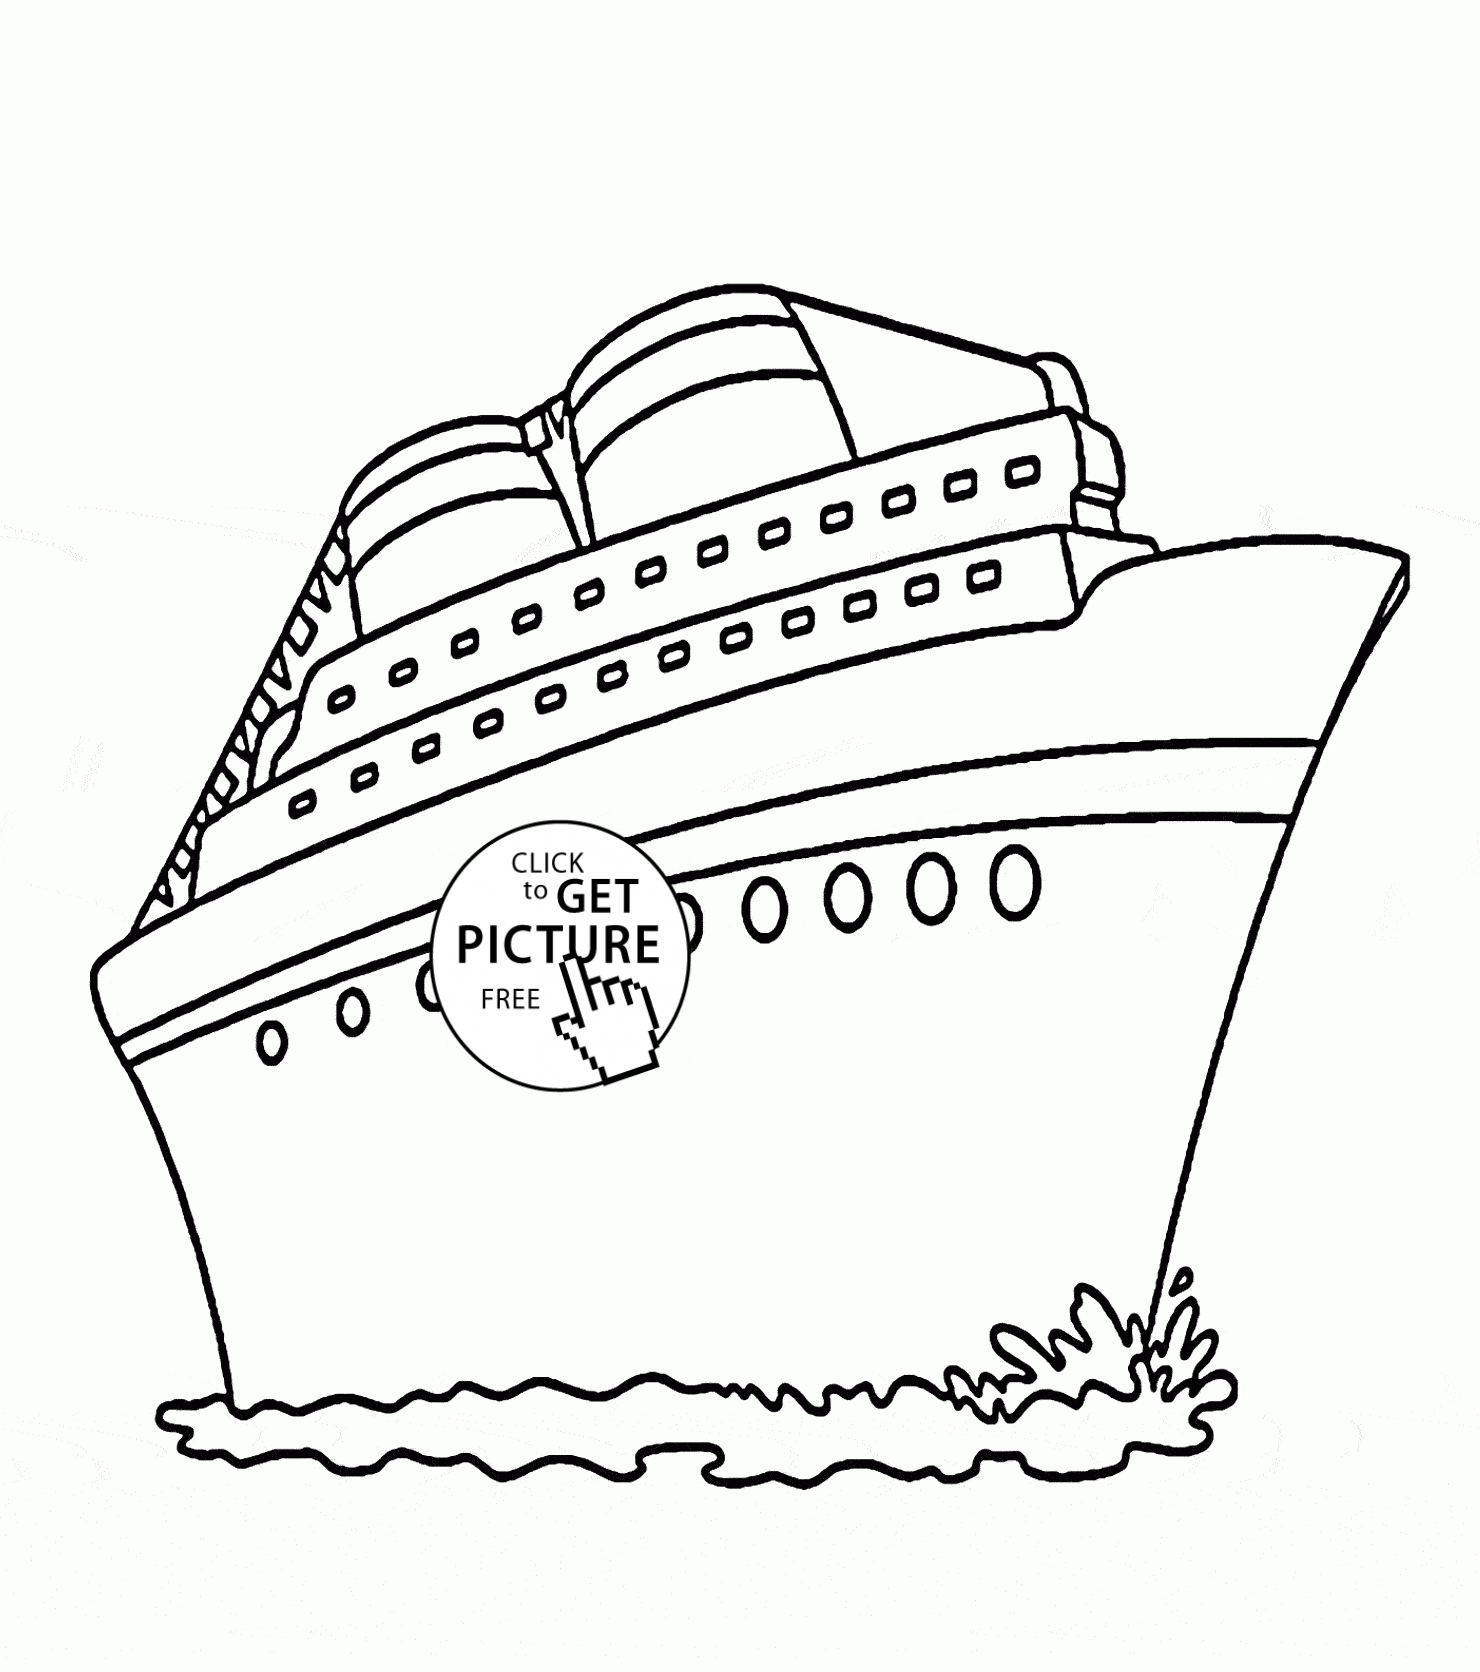 coloring pages cruise ship cruise ship coloring page at getcoloringscom free ship coloring pages cruise 